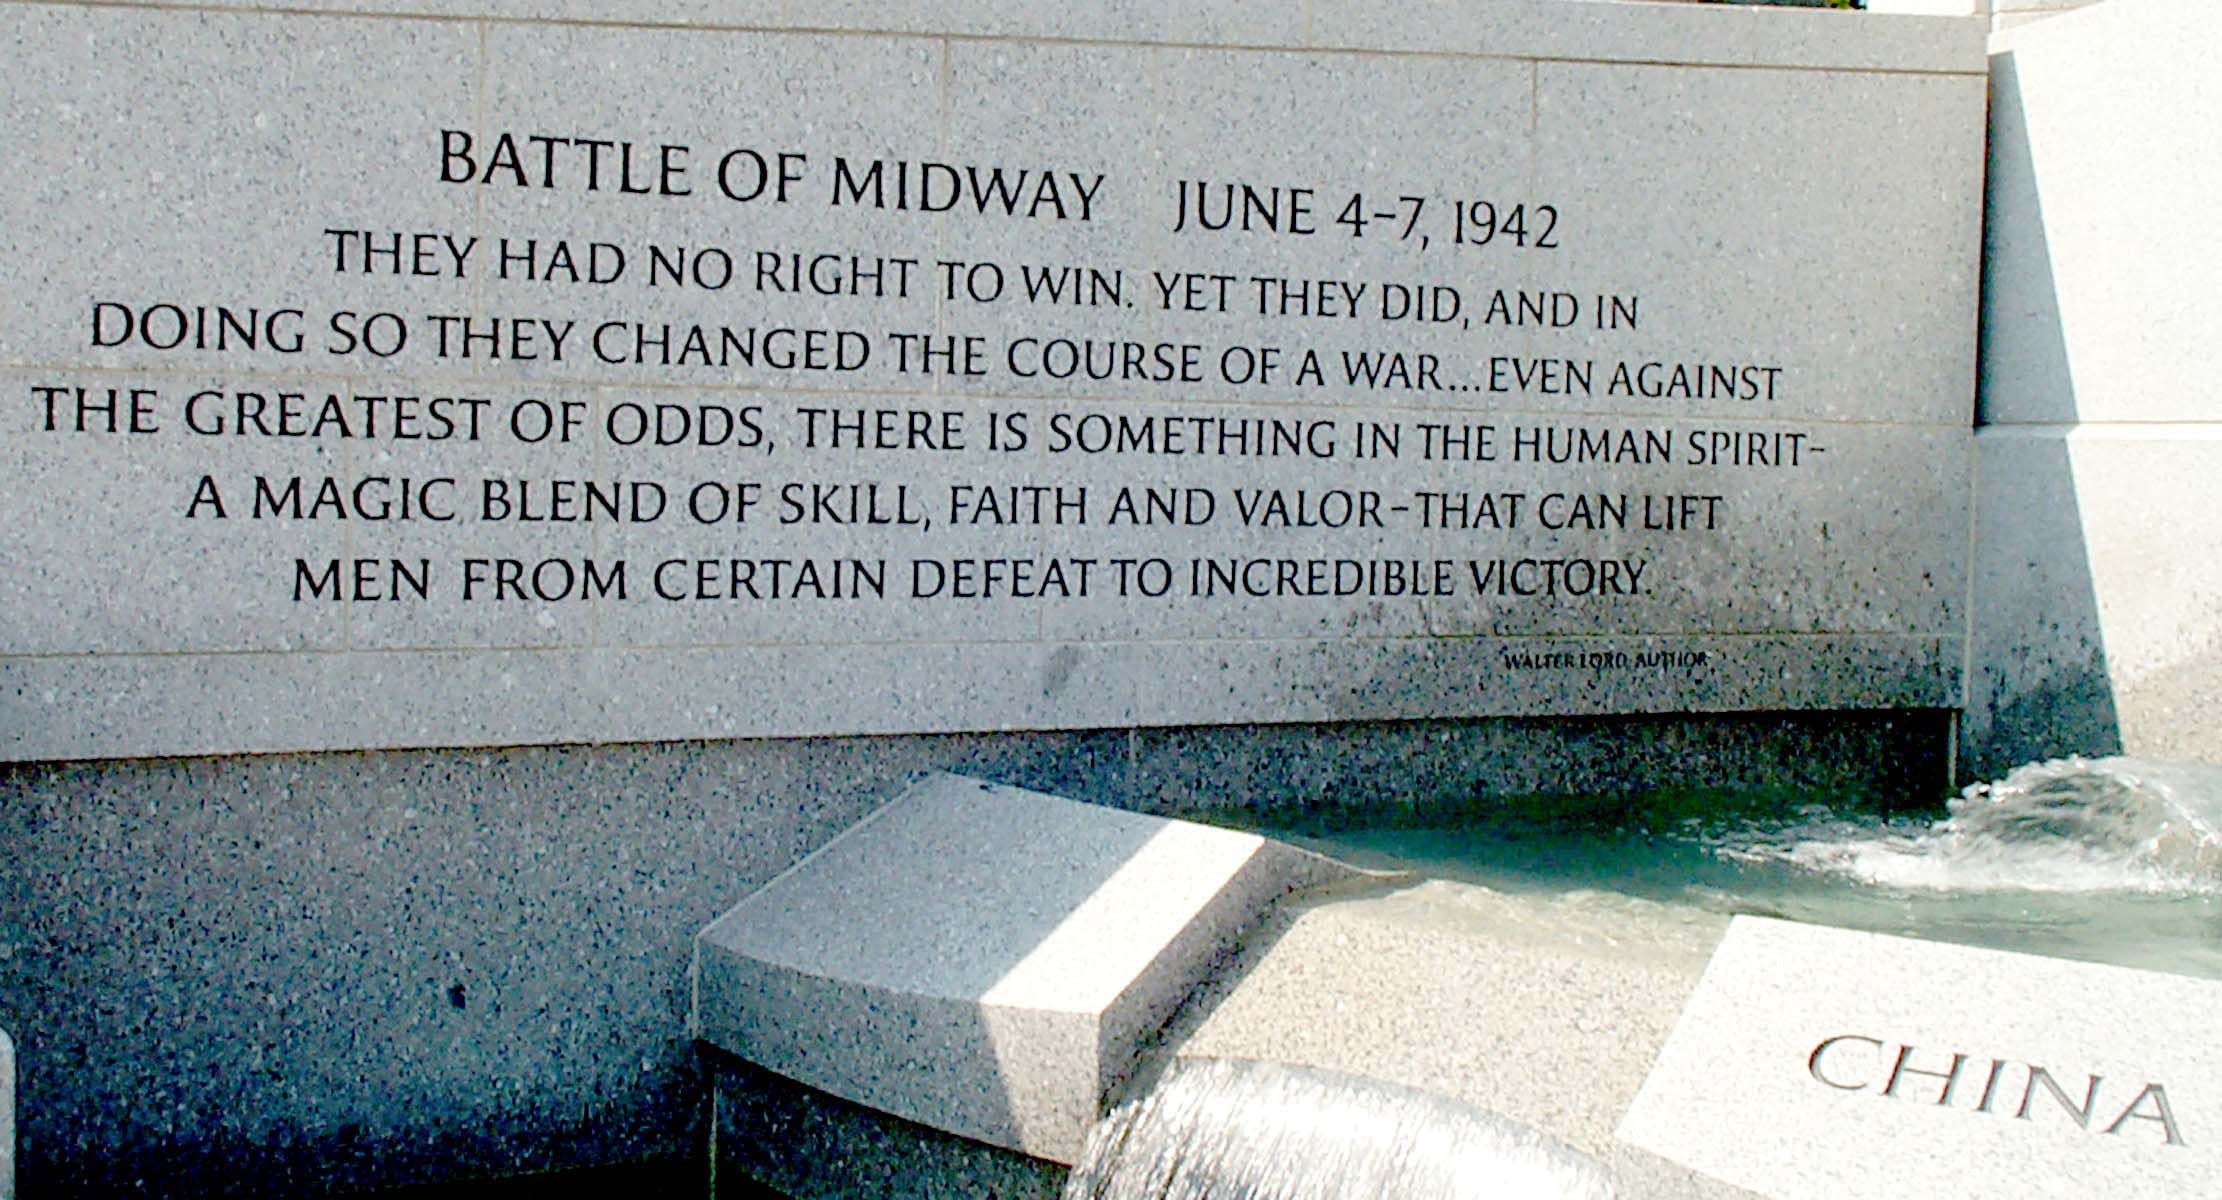 Battle of Midway, The National WWII Museum